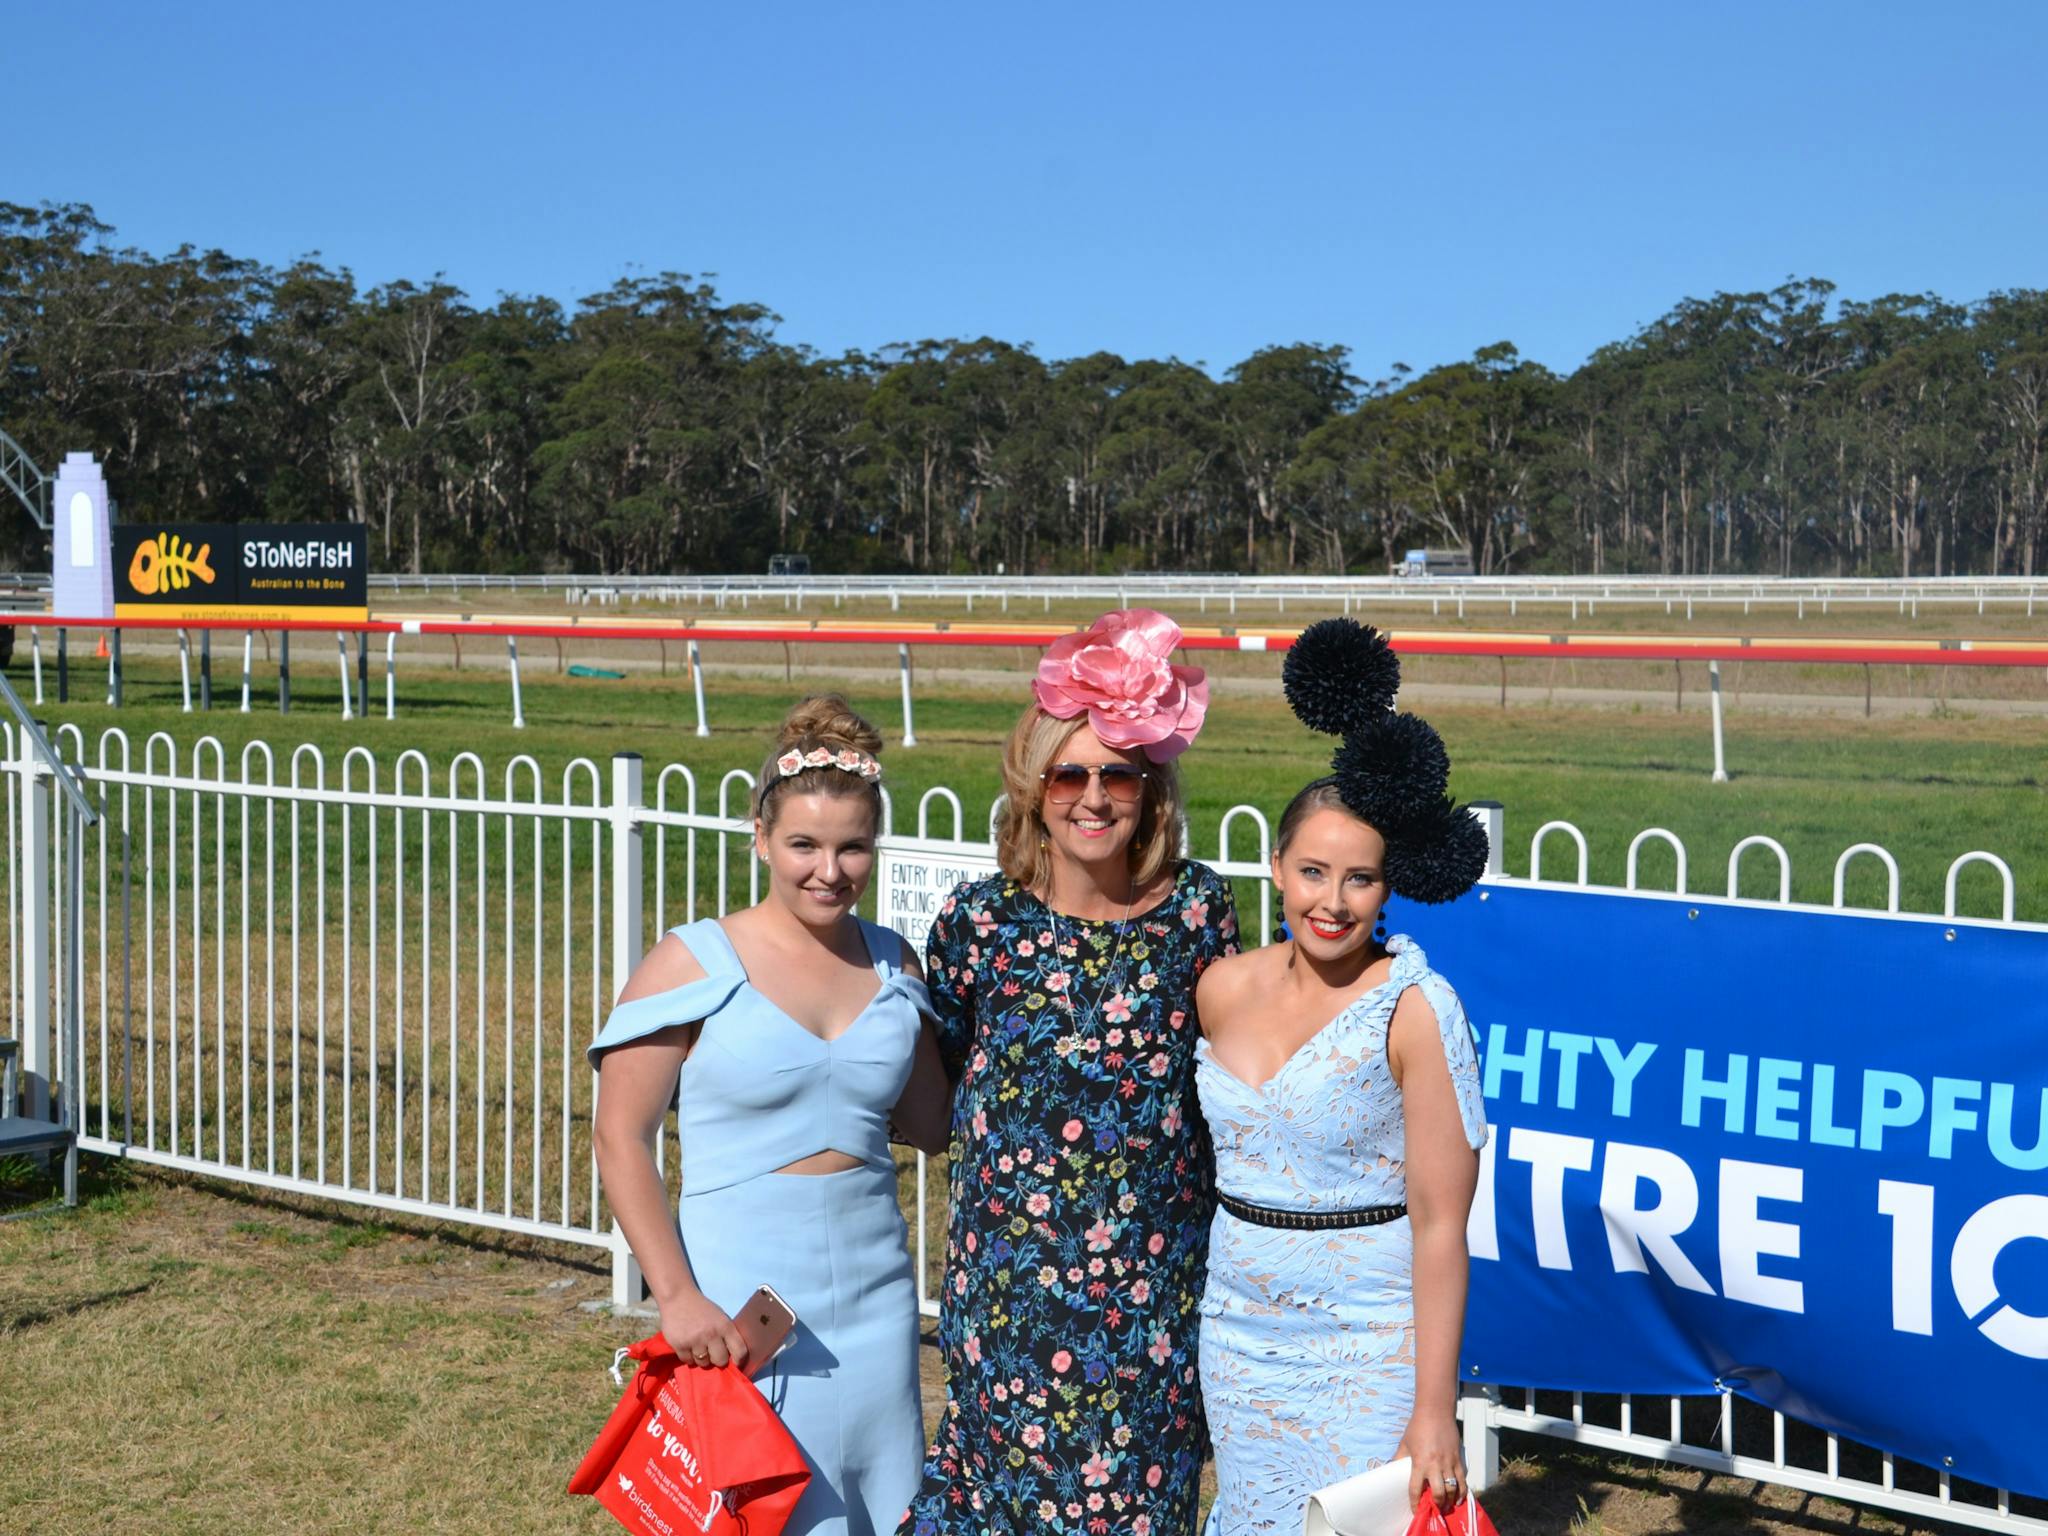 3 ladies showing off the fashions at the Moruya Race Course